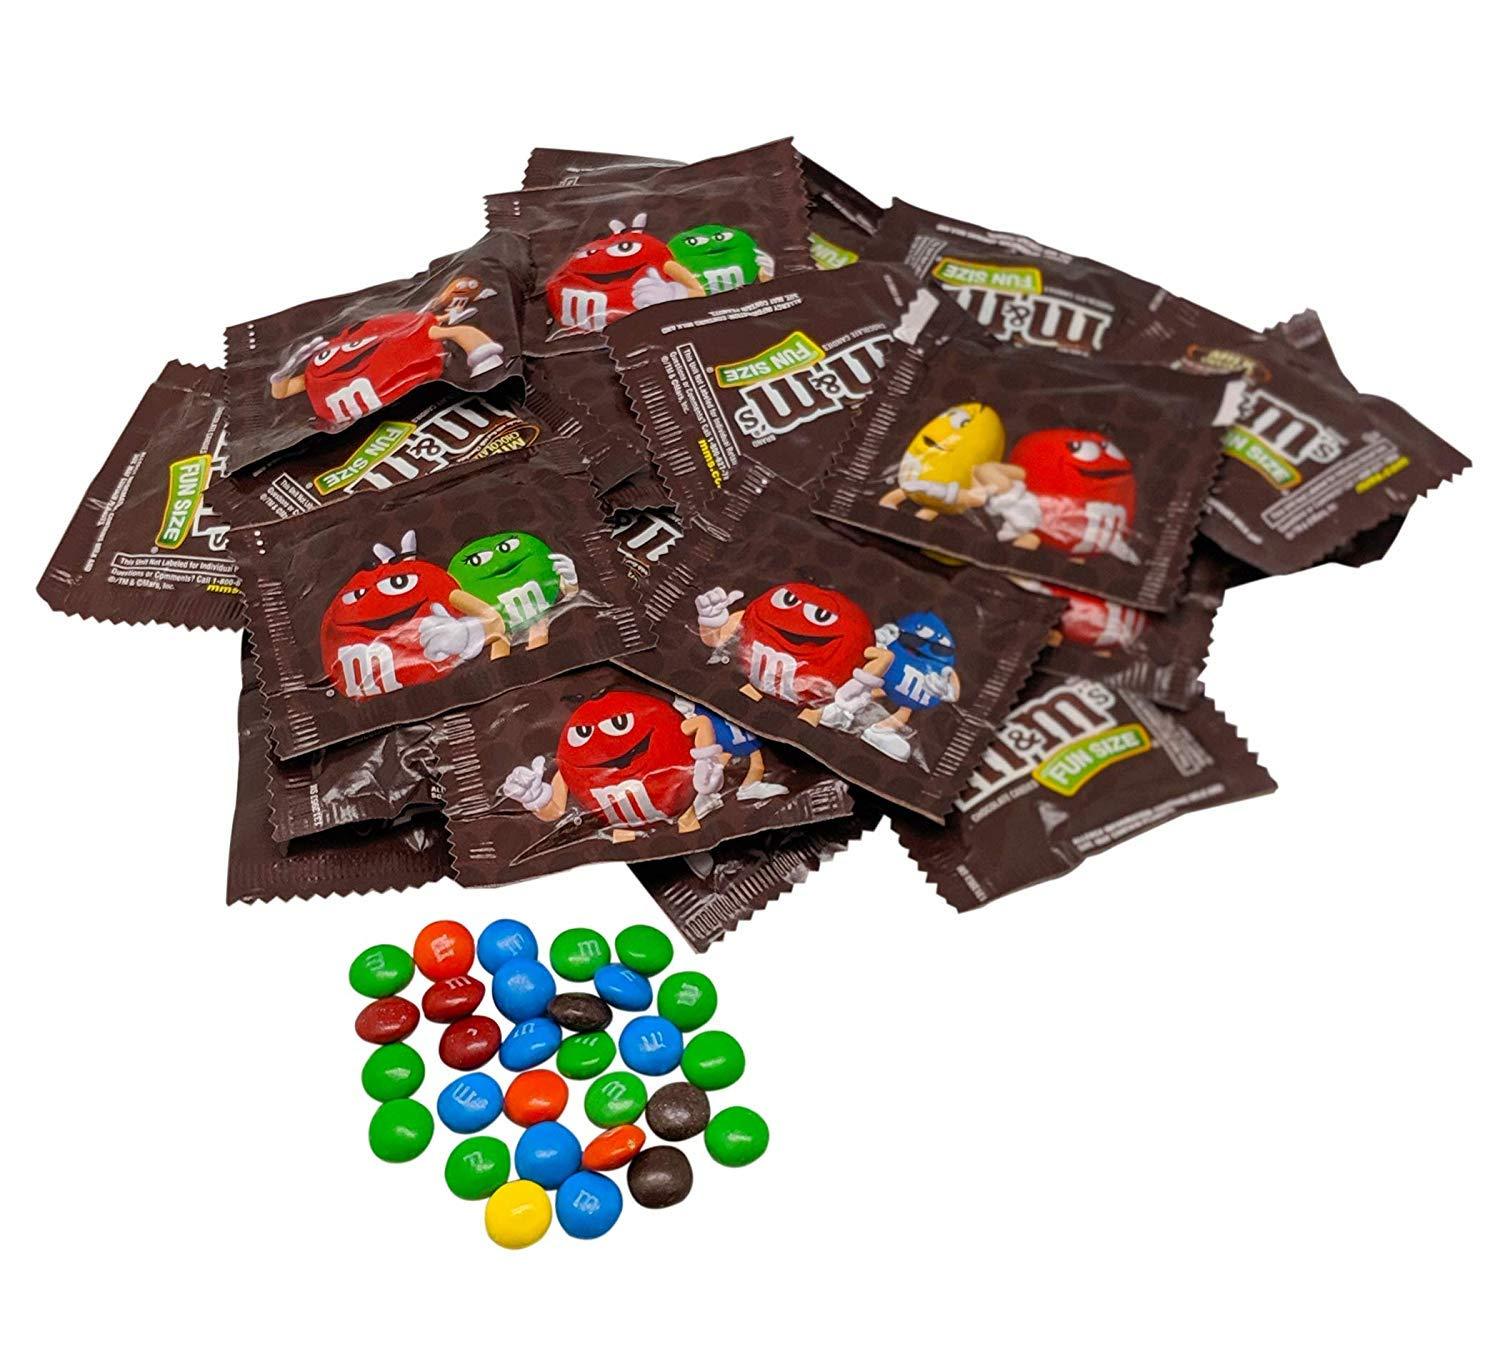  M&M'S Peanut Black Chocolate Candy - 2lbs of Bulk Candy in  Resealable Pack for Easter, Candy Buffet, Birthday Parties, Theme Meetings, Candy  Bar, Sweet Stuff for DIY Party Favors or Edible